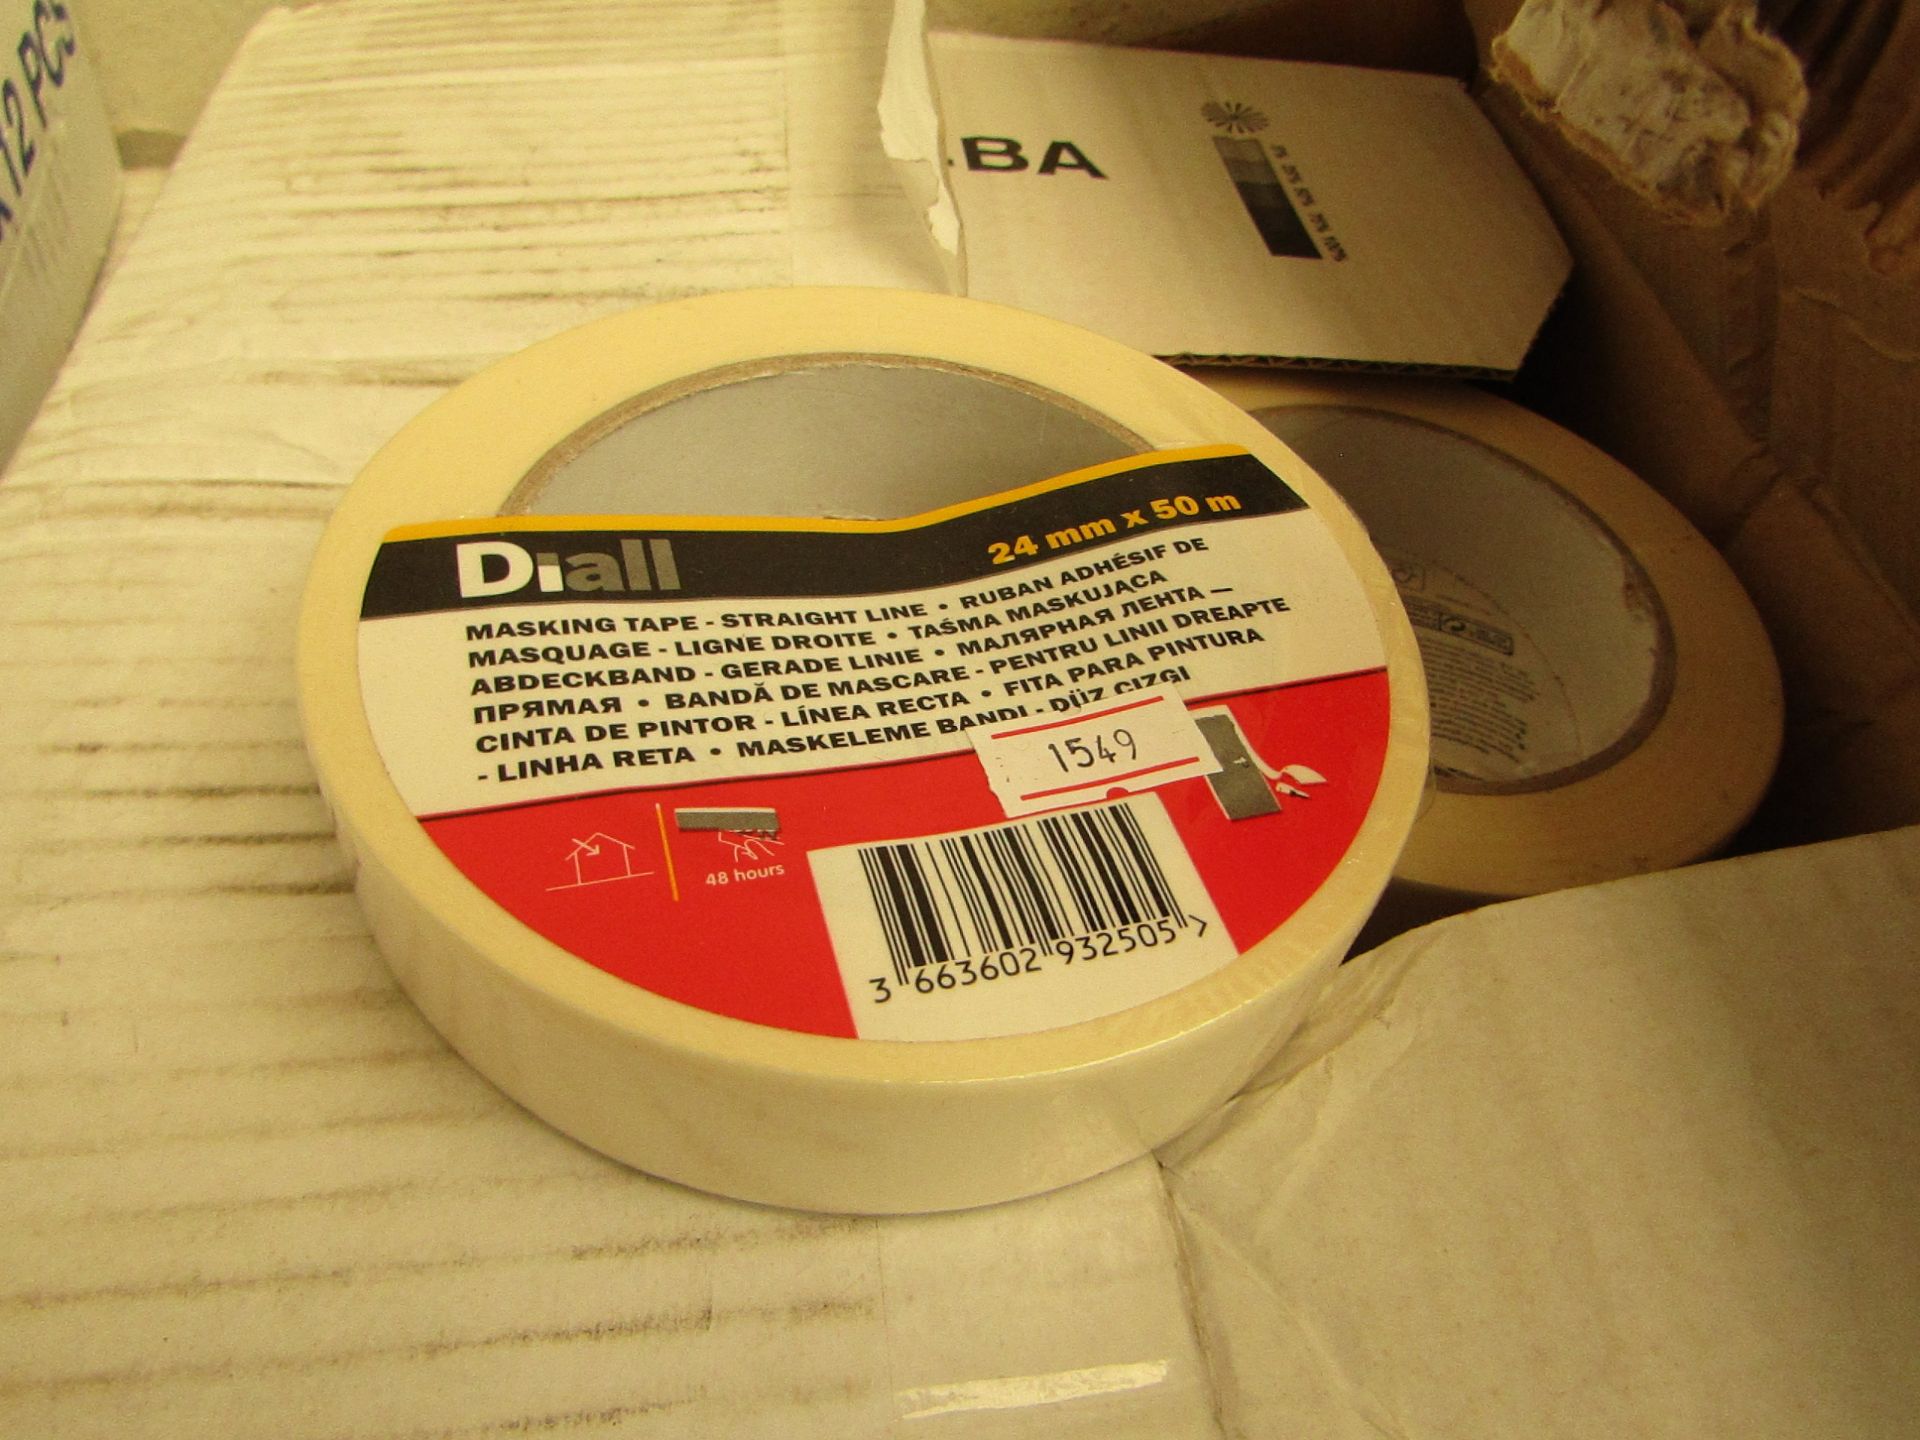 2x Diall Masking Tape, 24mm x 50m, New and Packaged